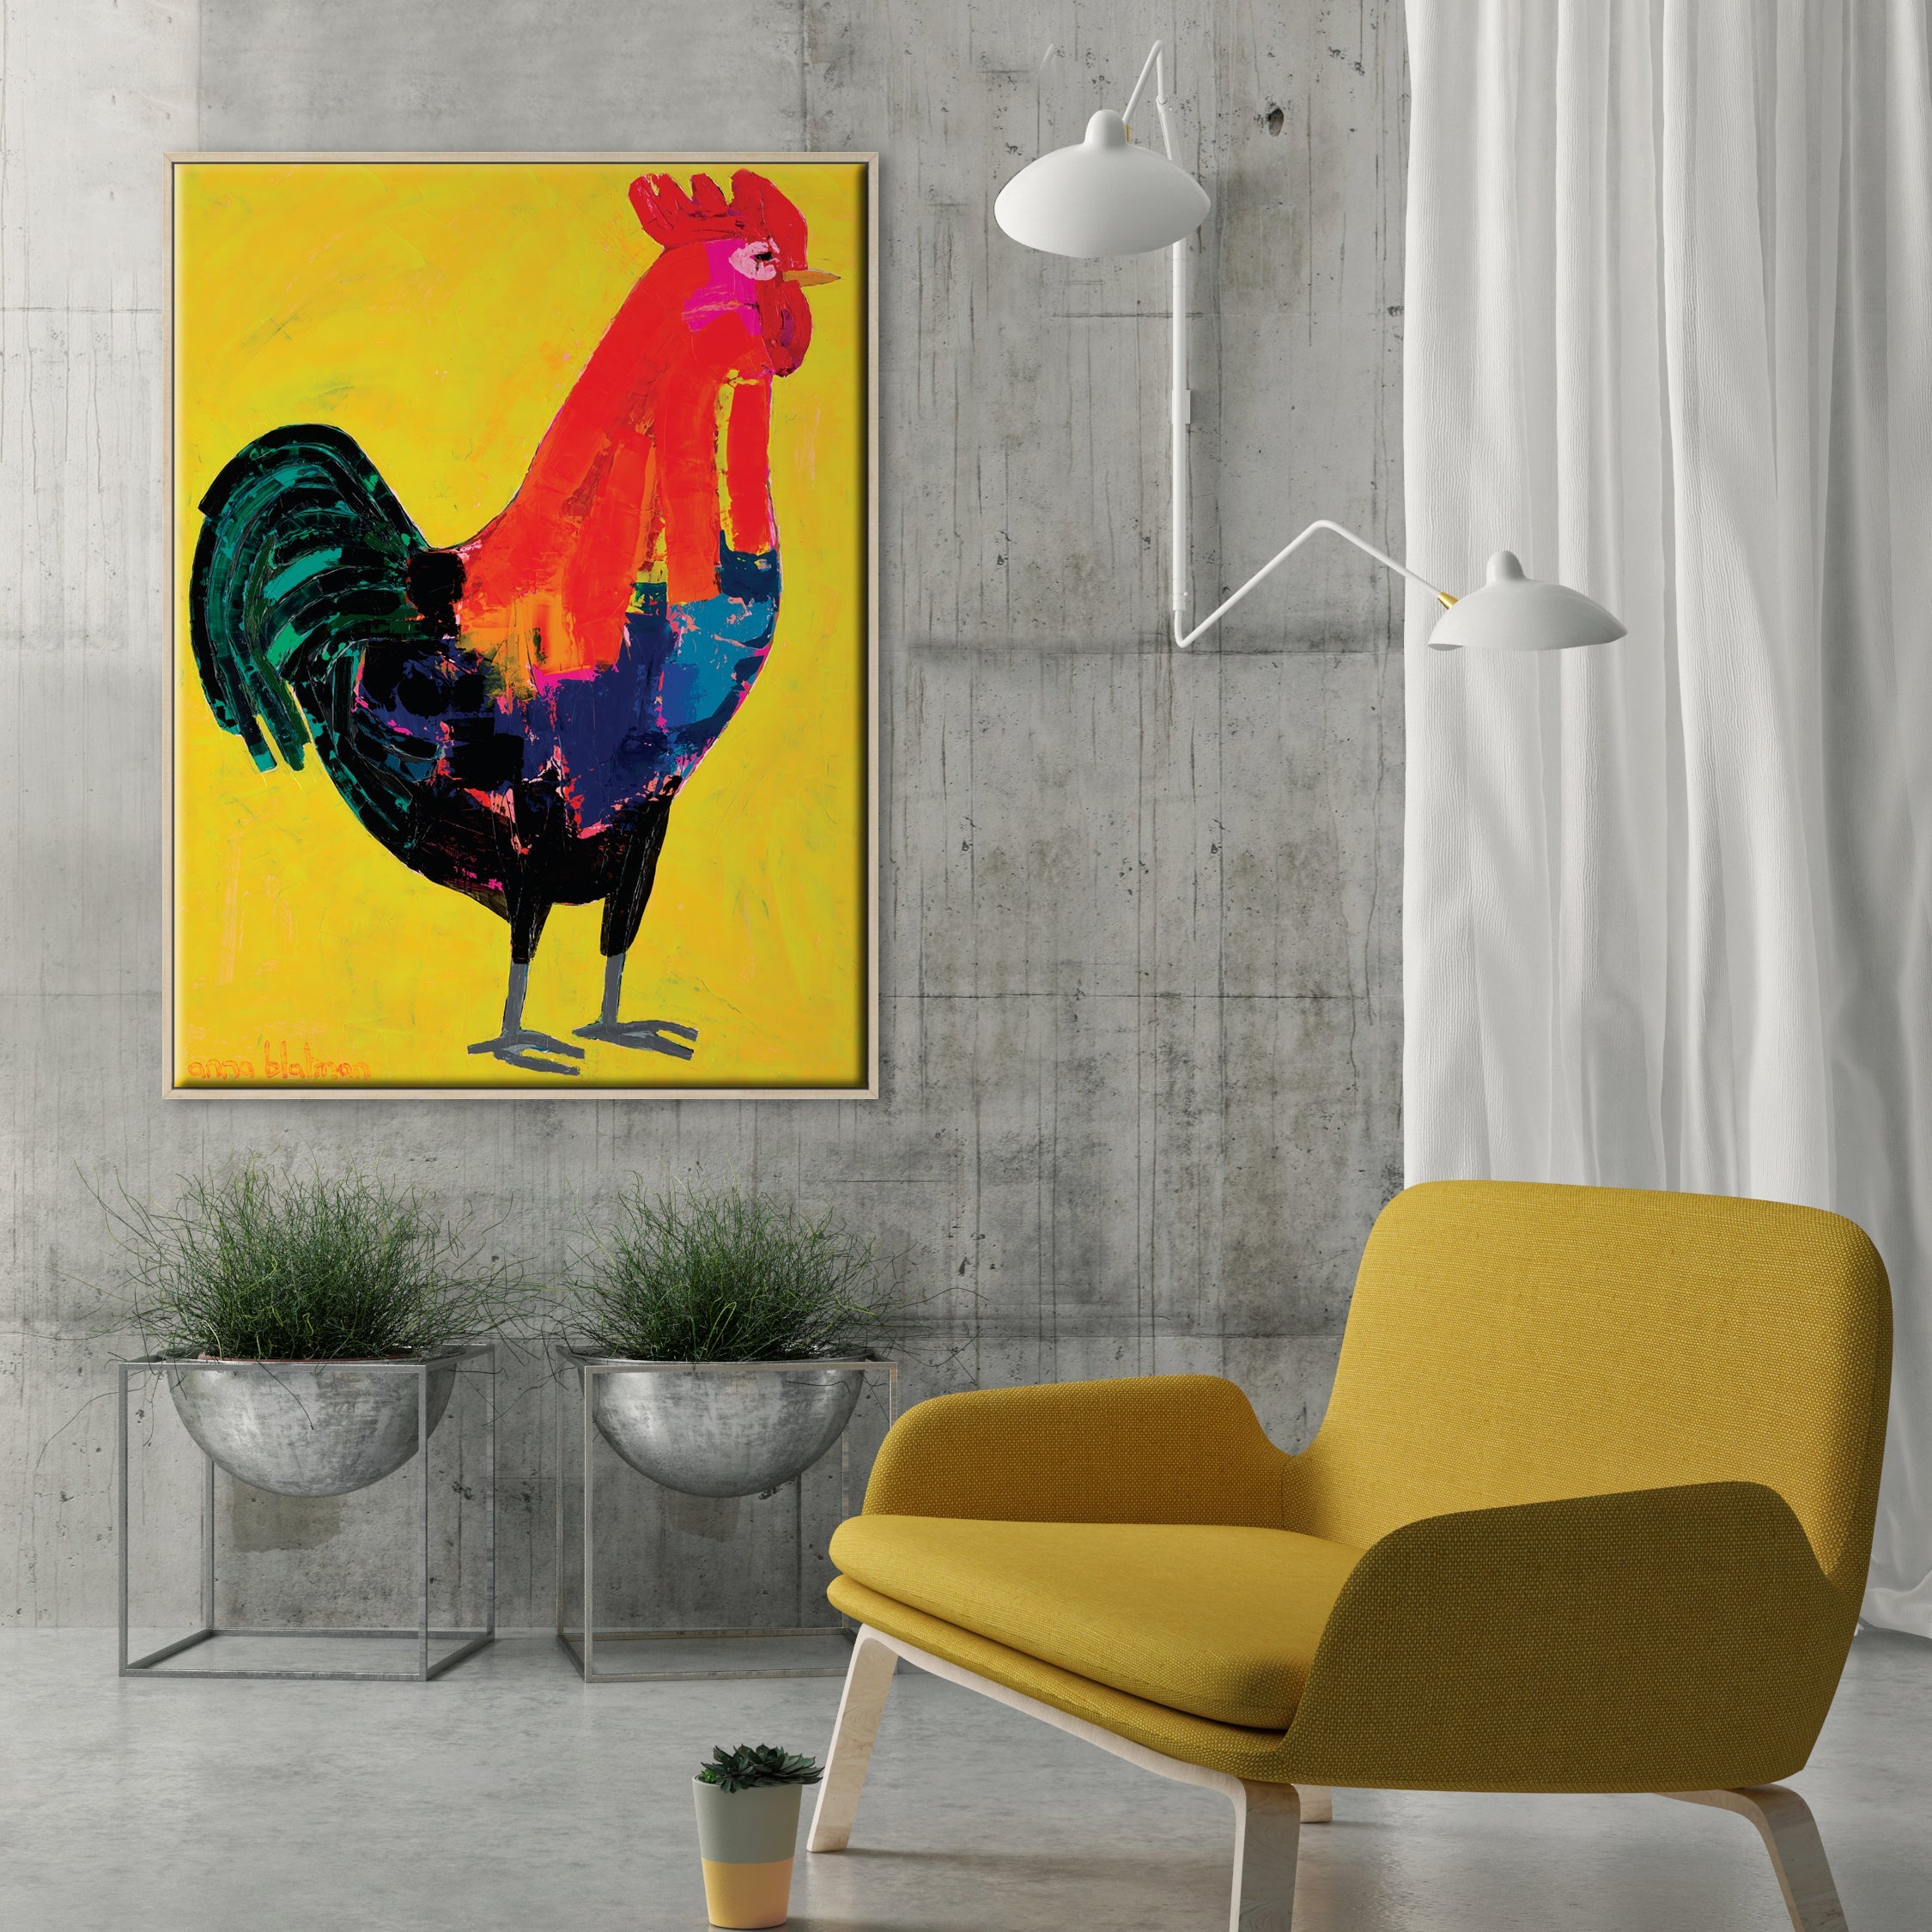 Rex 2 - Gallery Wrapped Canvas